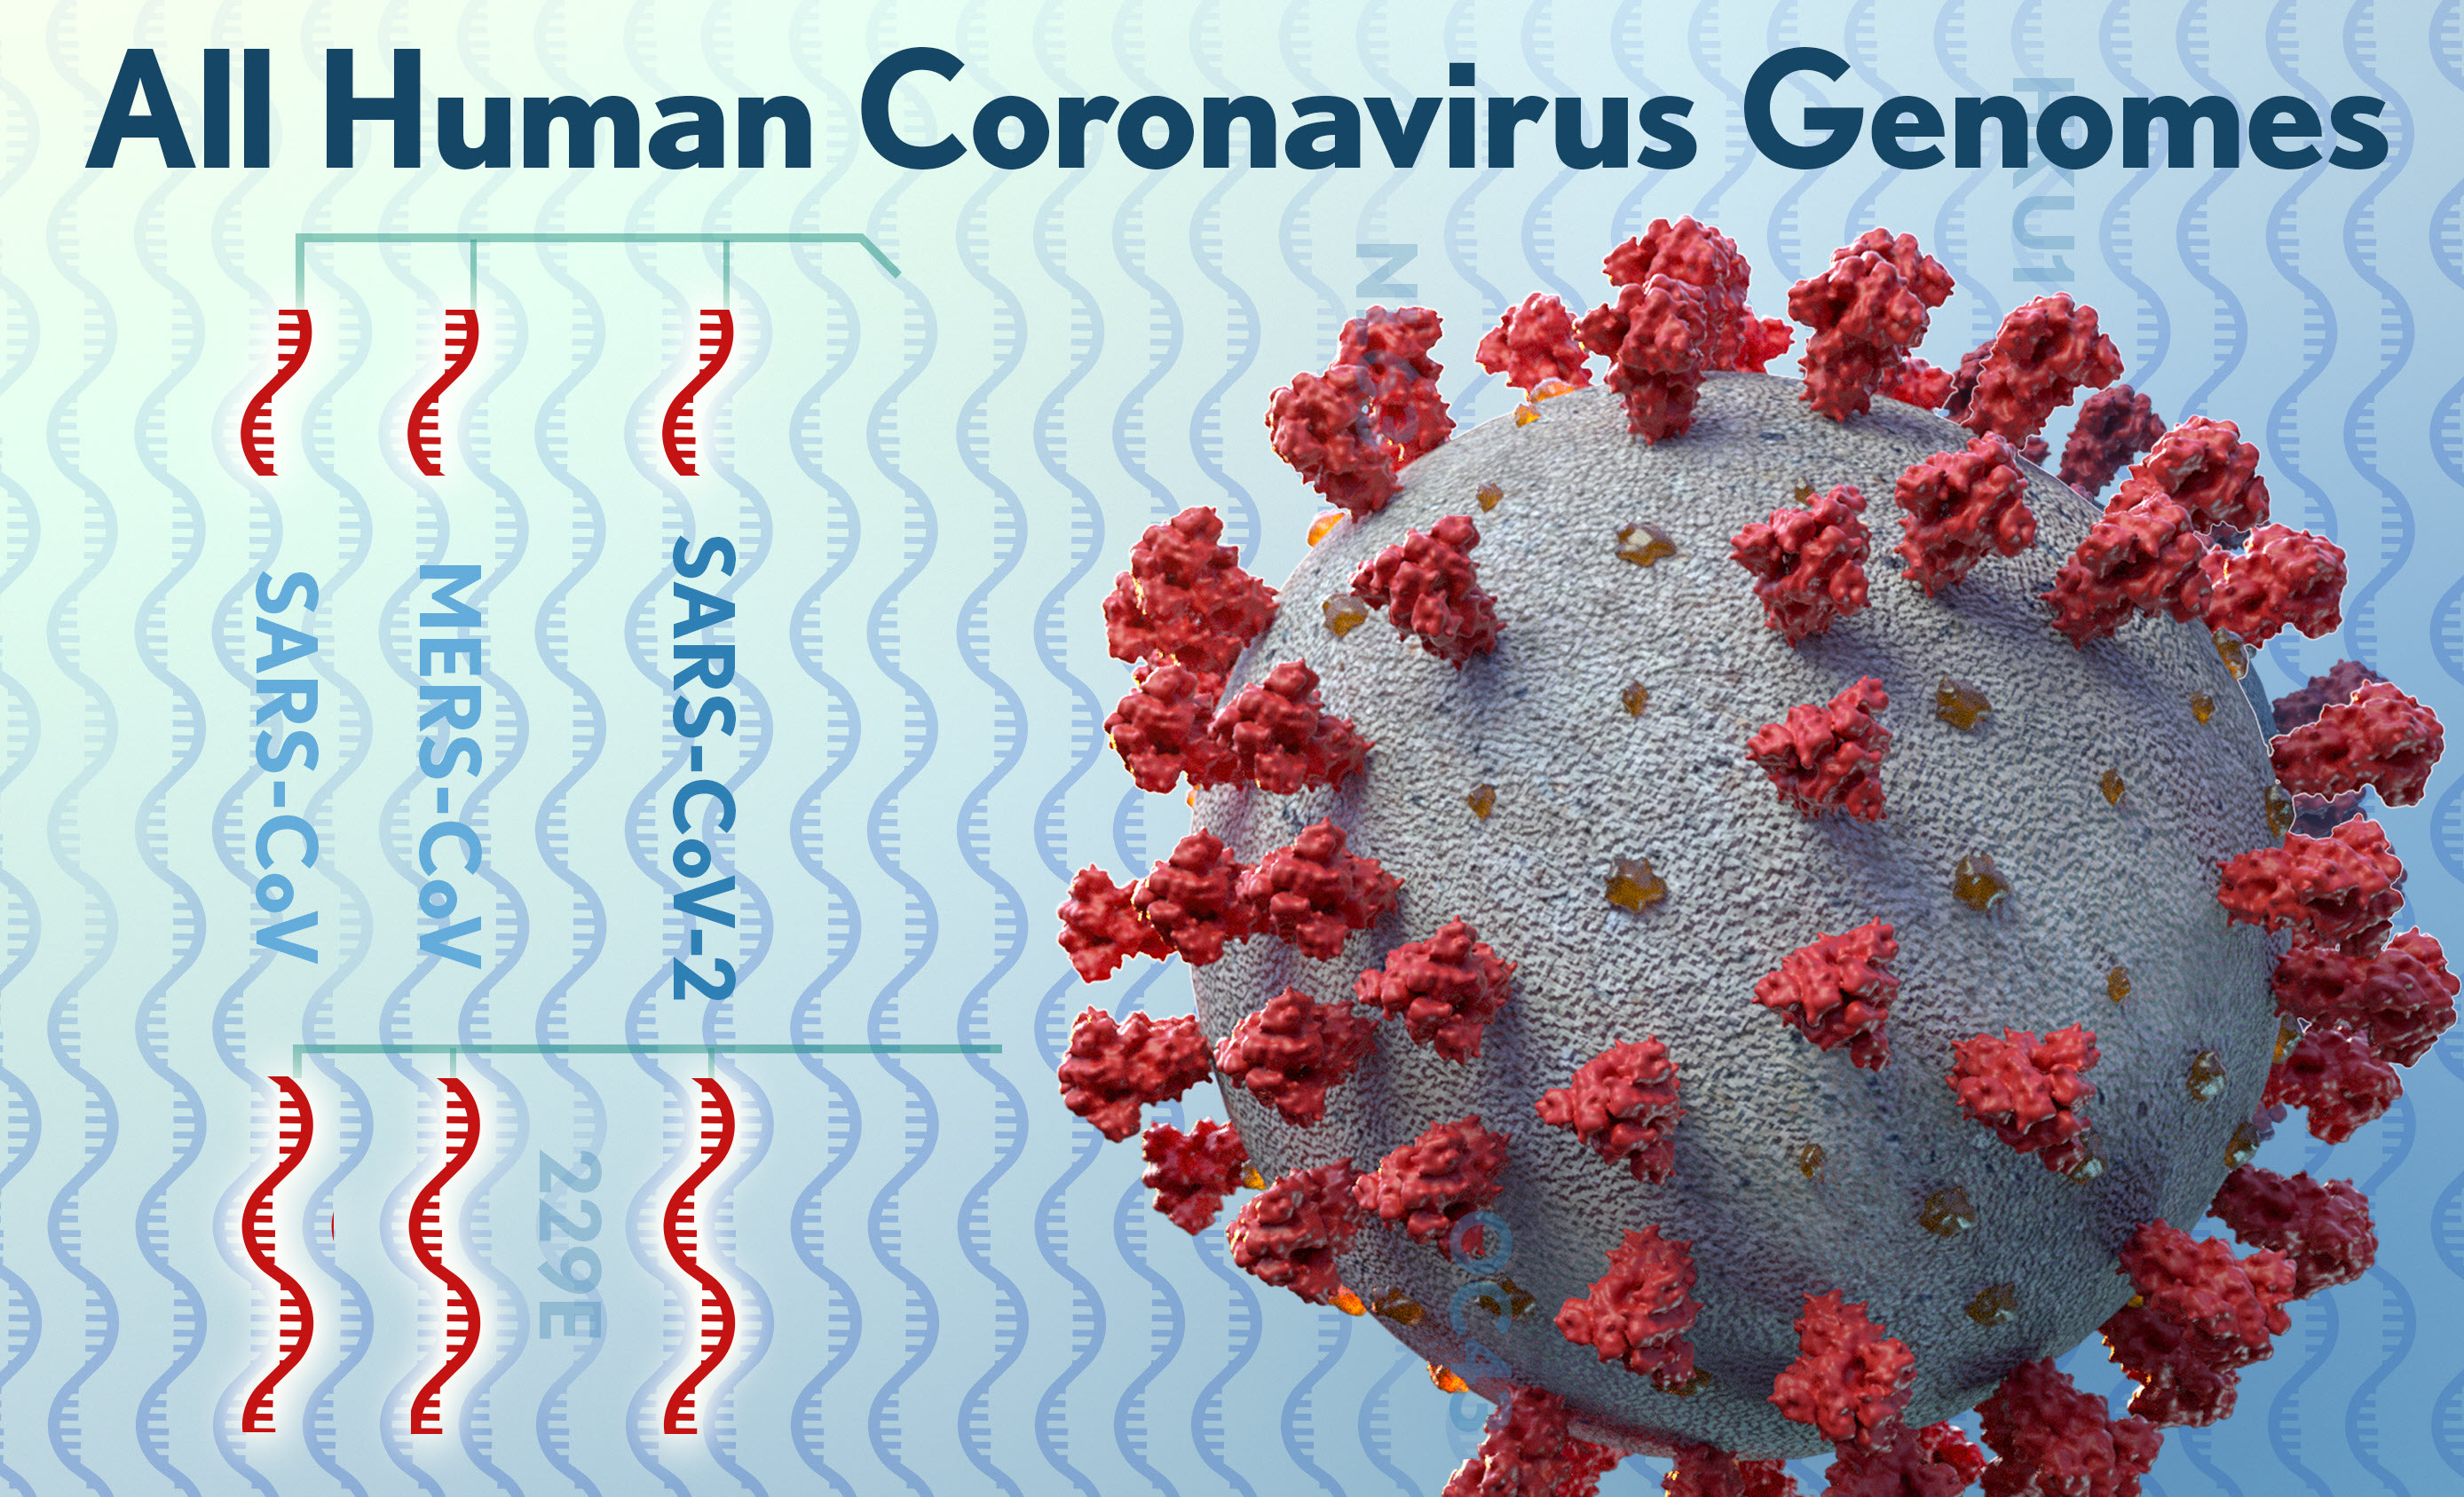 Graphic entitled All Human Coronavirus Genomes. Shows a model of a coronavirus with wavy lines in the background. Text on left says SARS-CoV-2, MERS_CoV and SARS-CoV